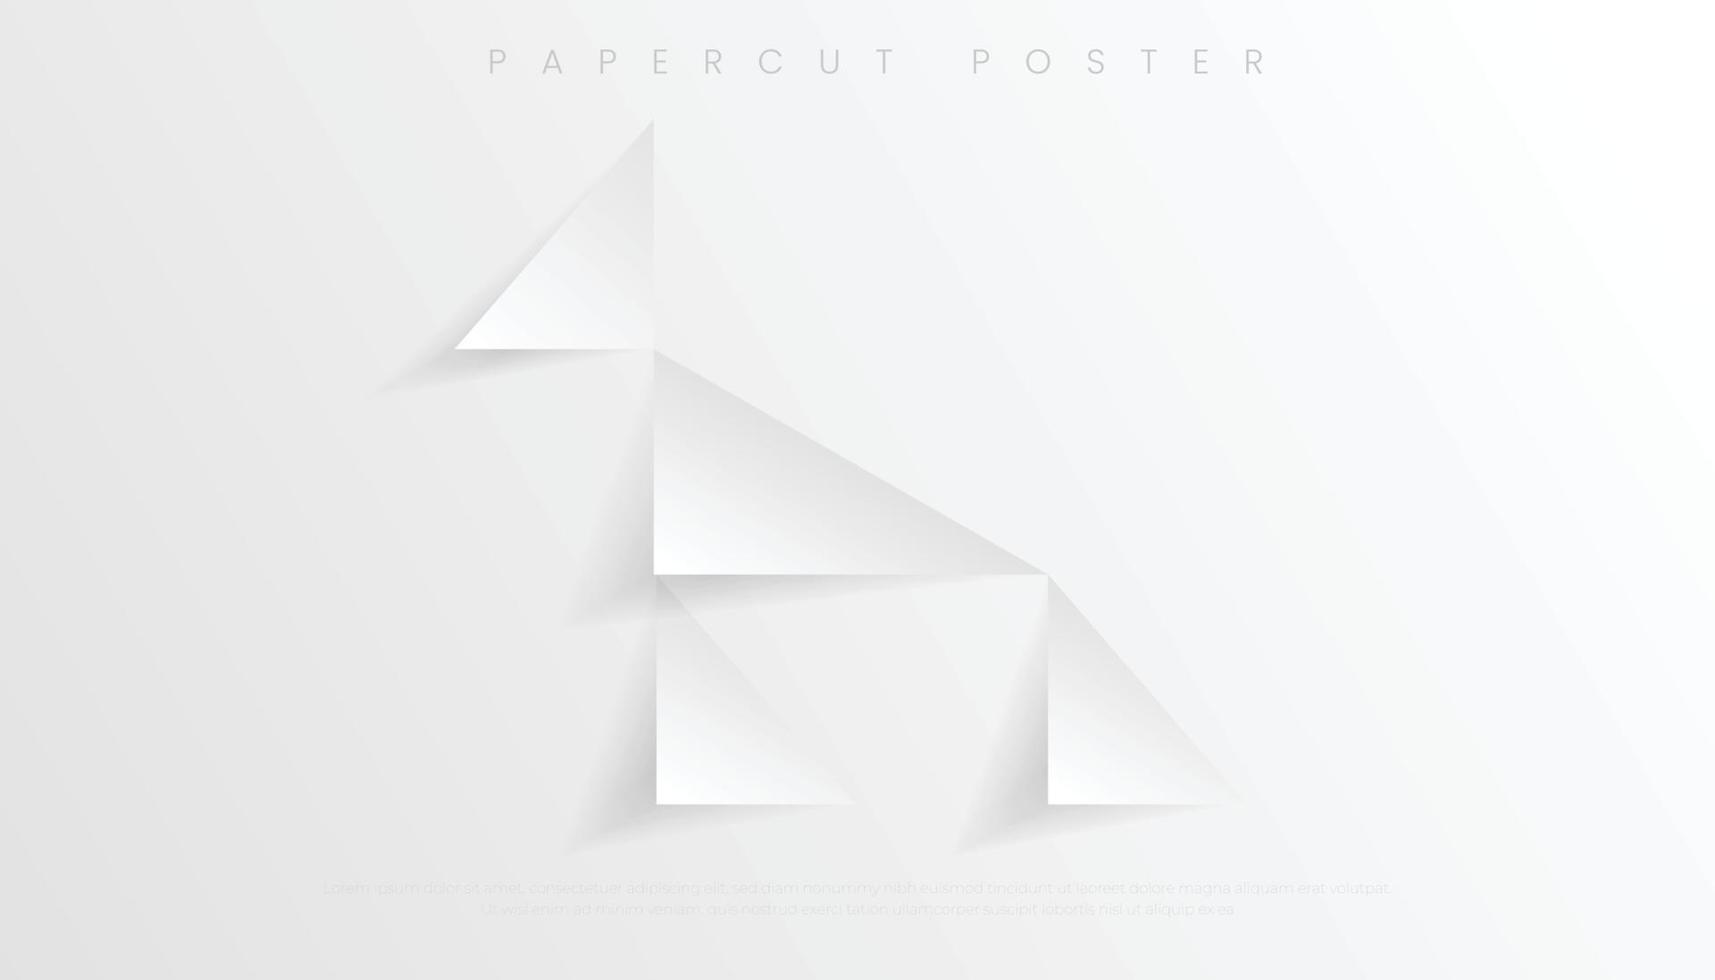 Modern White Abstract Geometric Background With Paper Art Effect vector